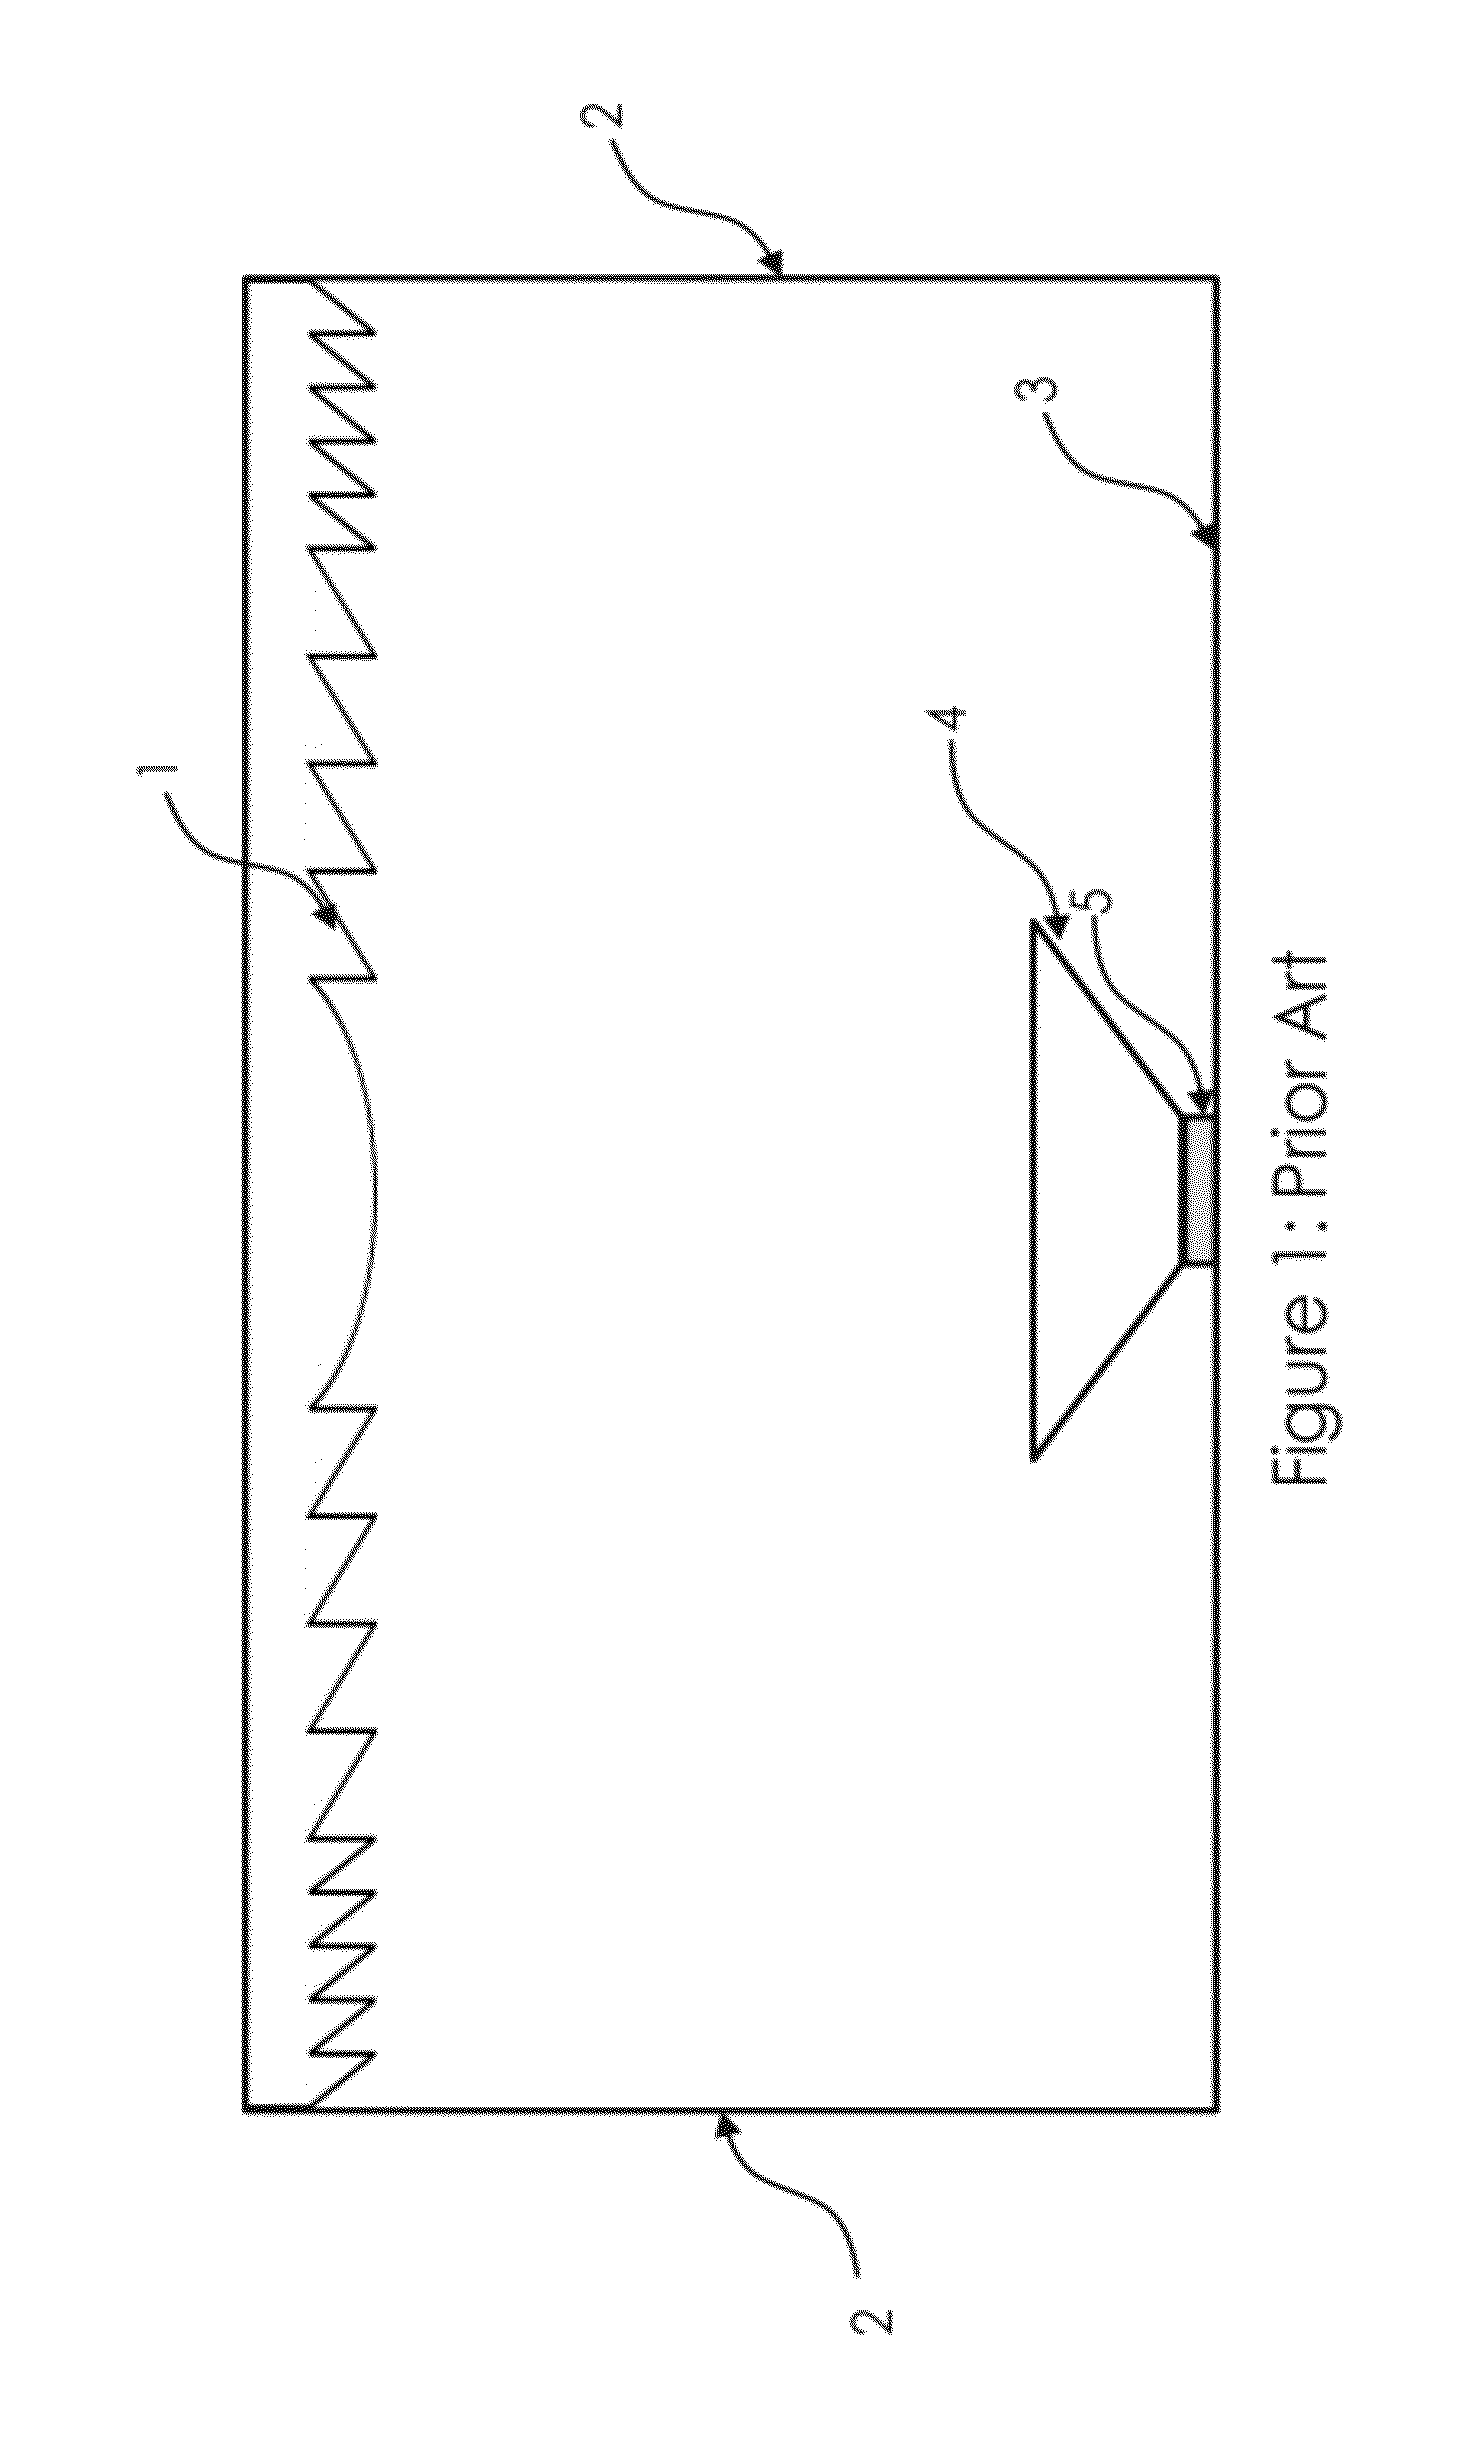 Photovoltaic system for efficient solar radiation collection and solar panel incorporating same